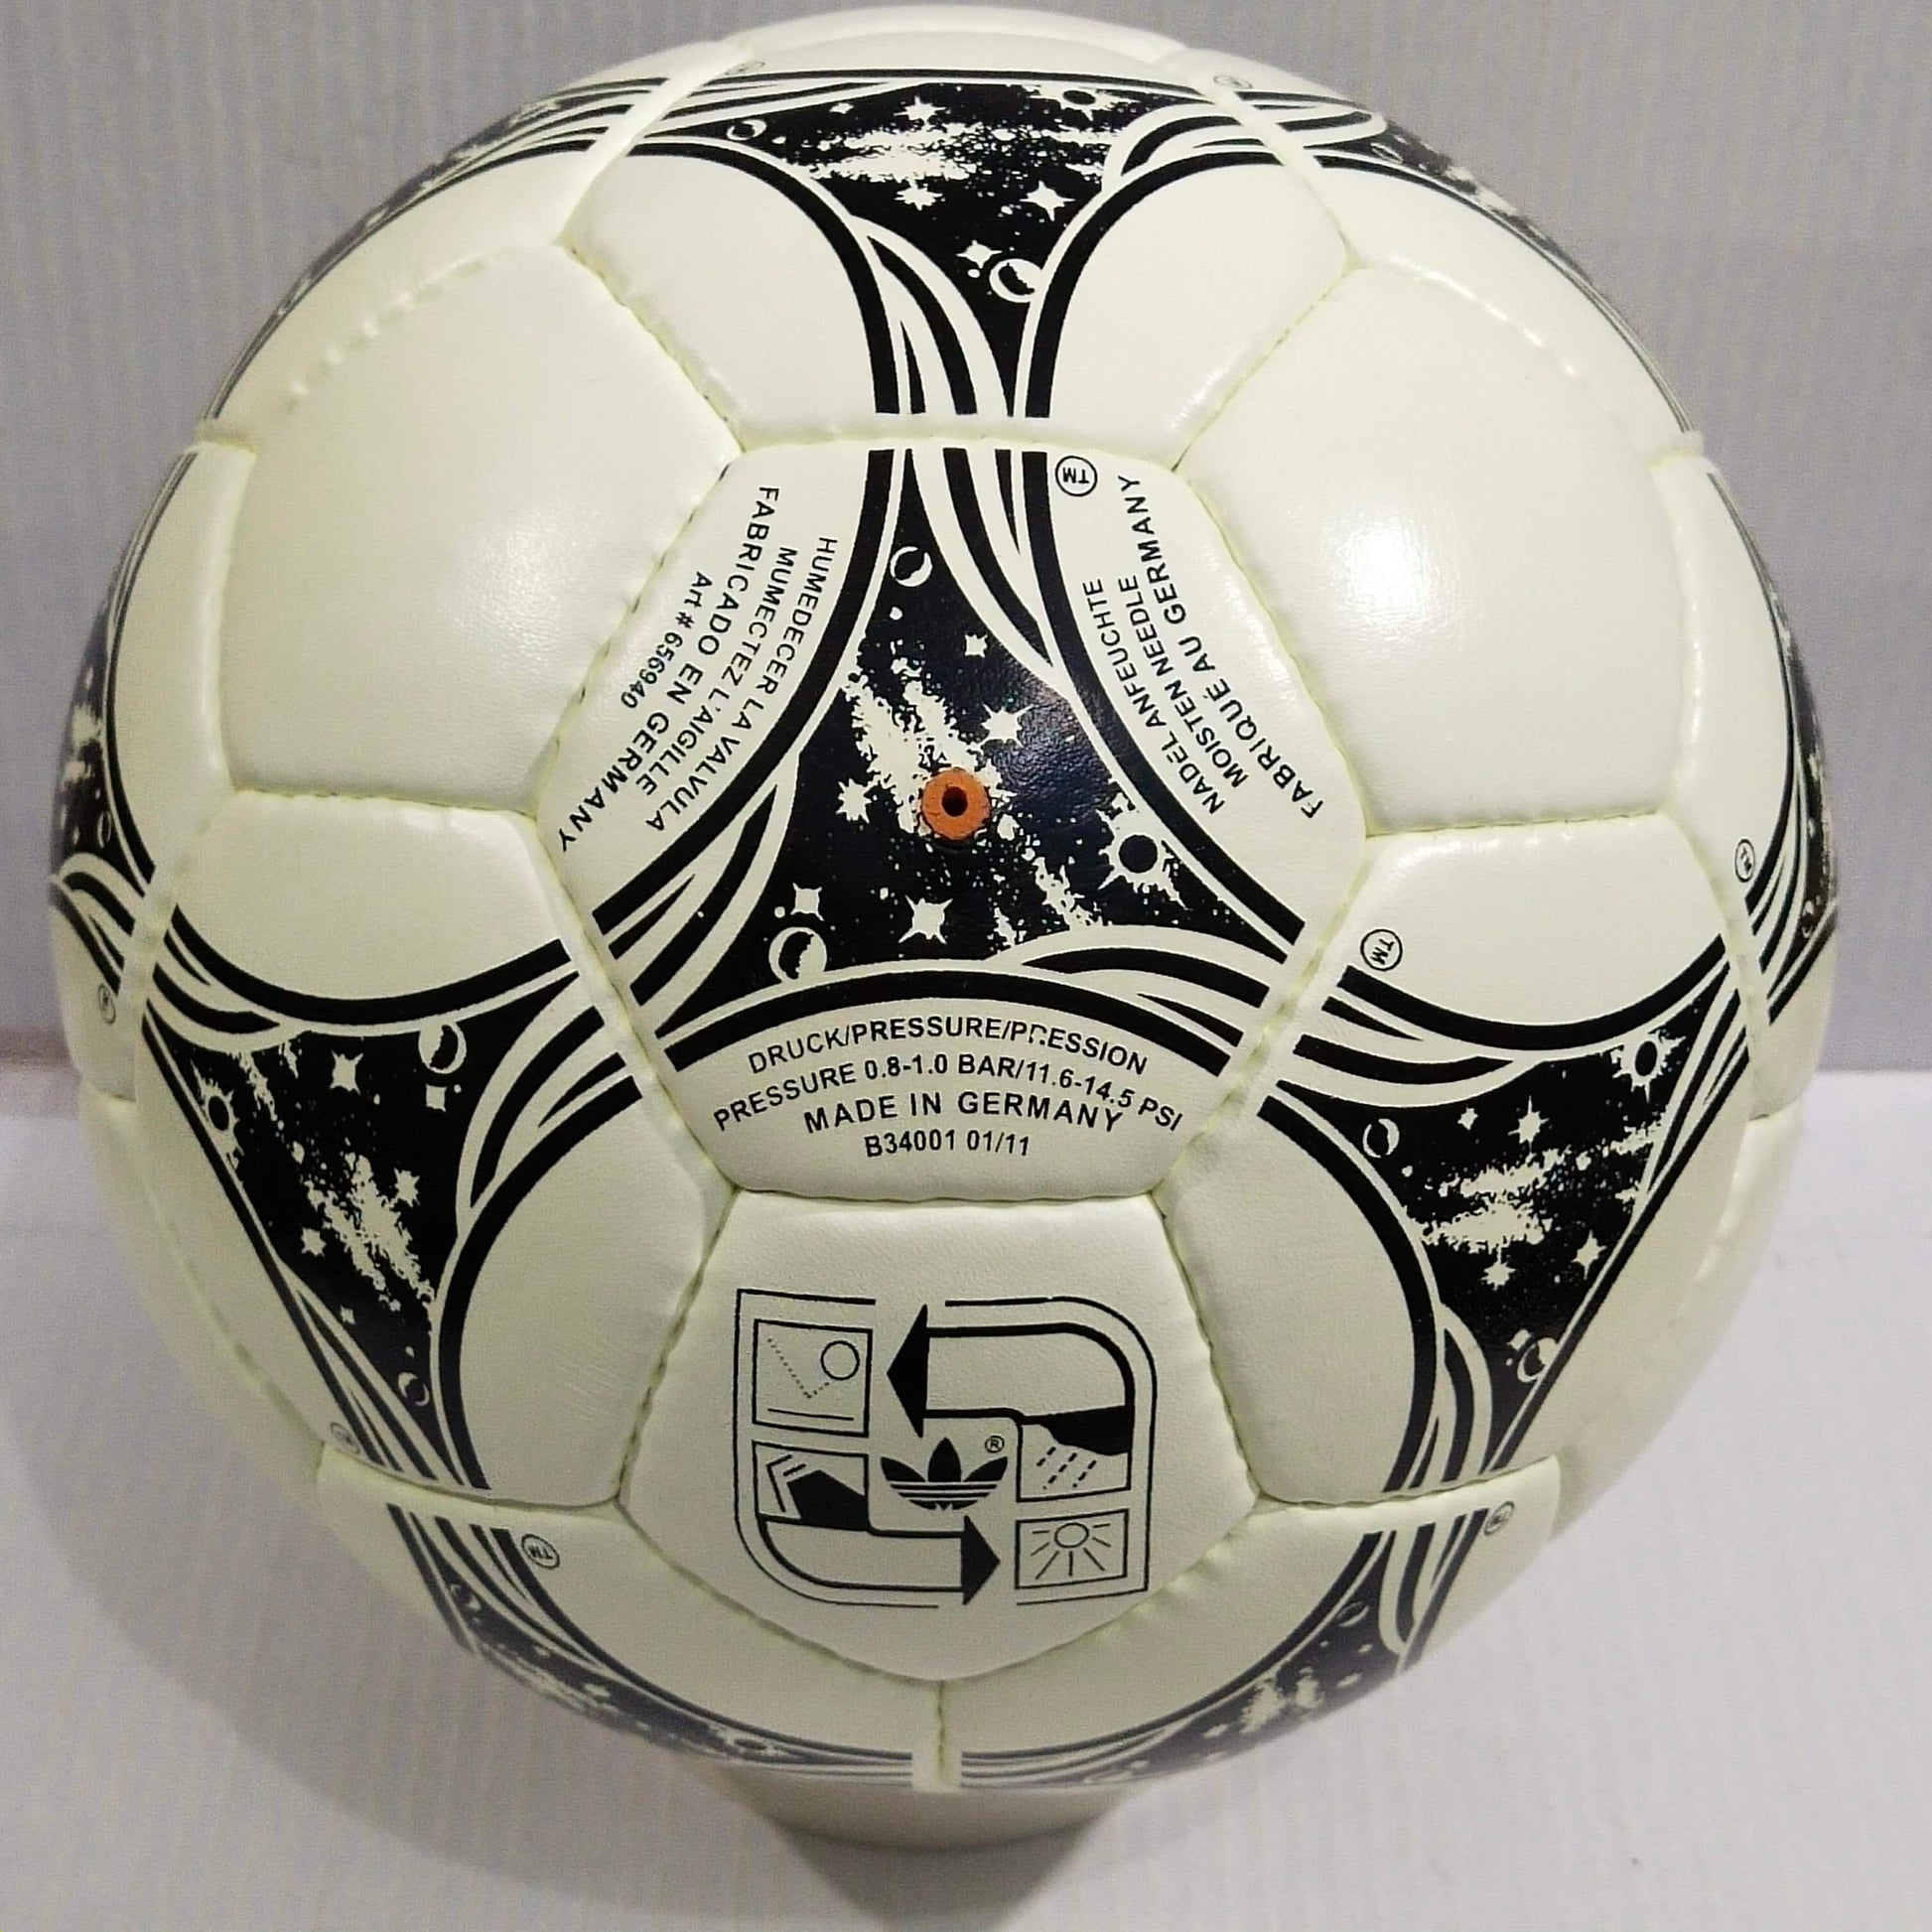 Adidas Questra | 1994 FIFA World Cup Ball | Genuine Leather Off White | SIZE 5 07